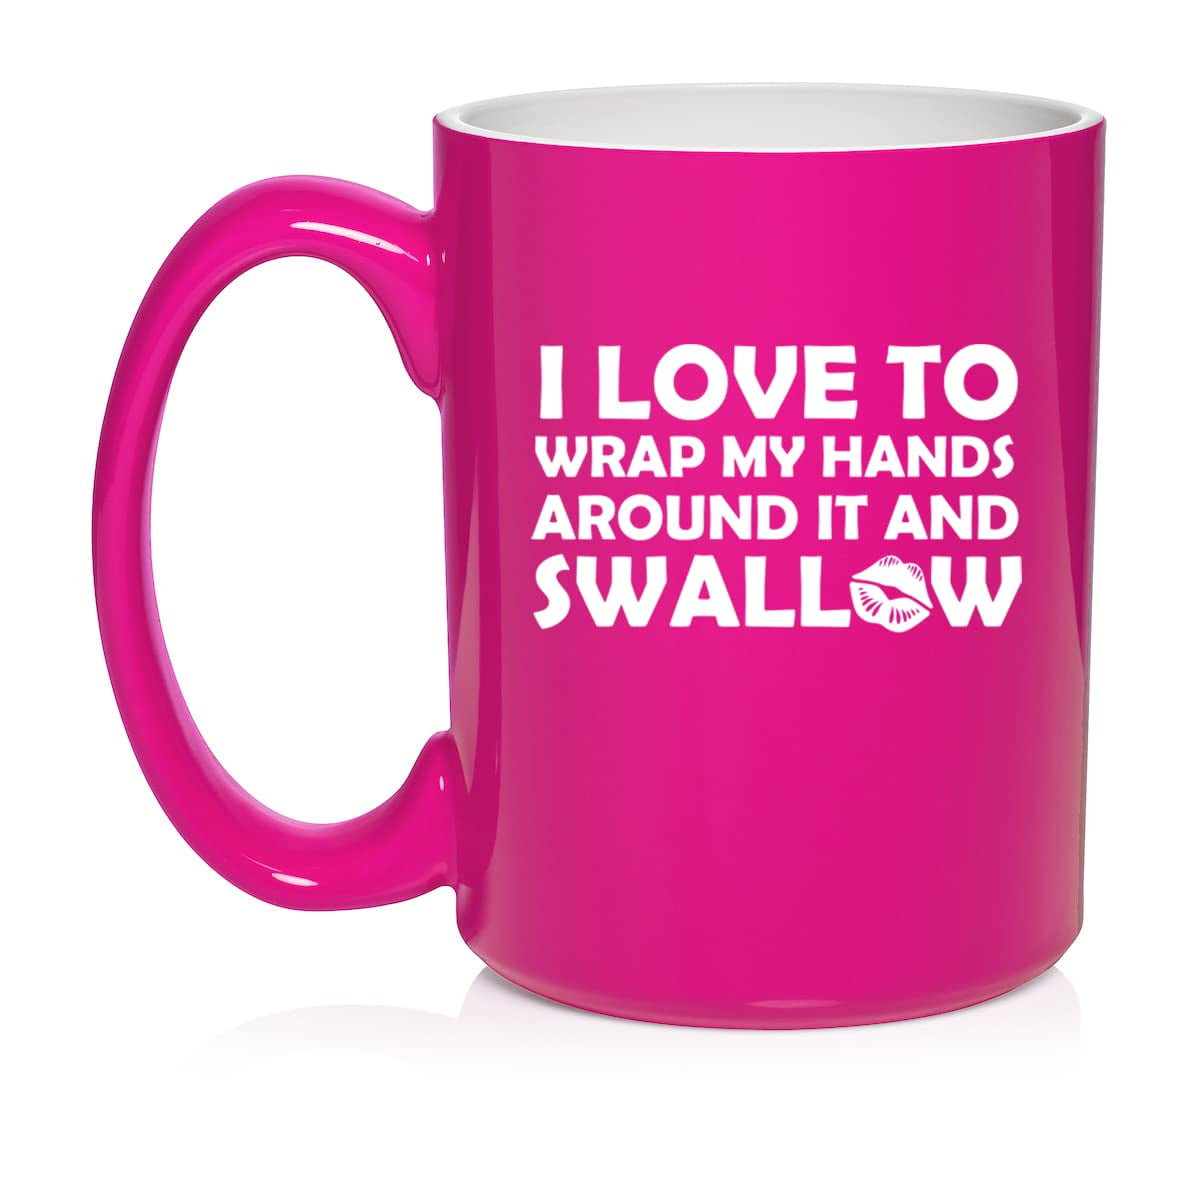 david kilzer recommends i love to swallow pic